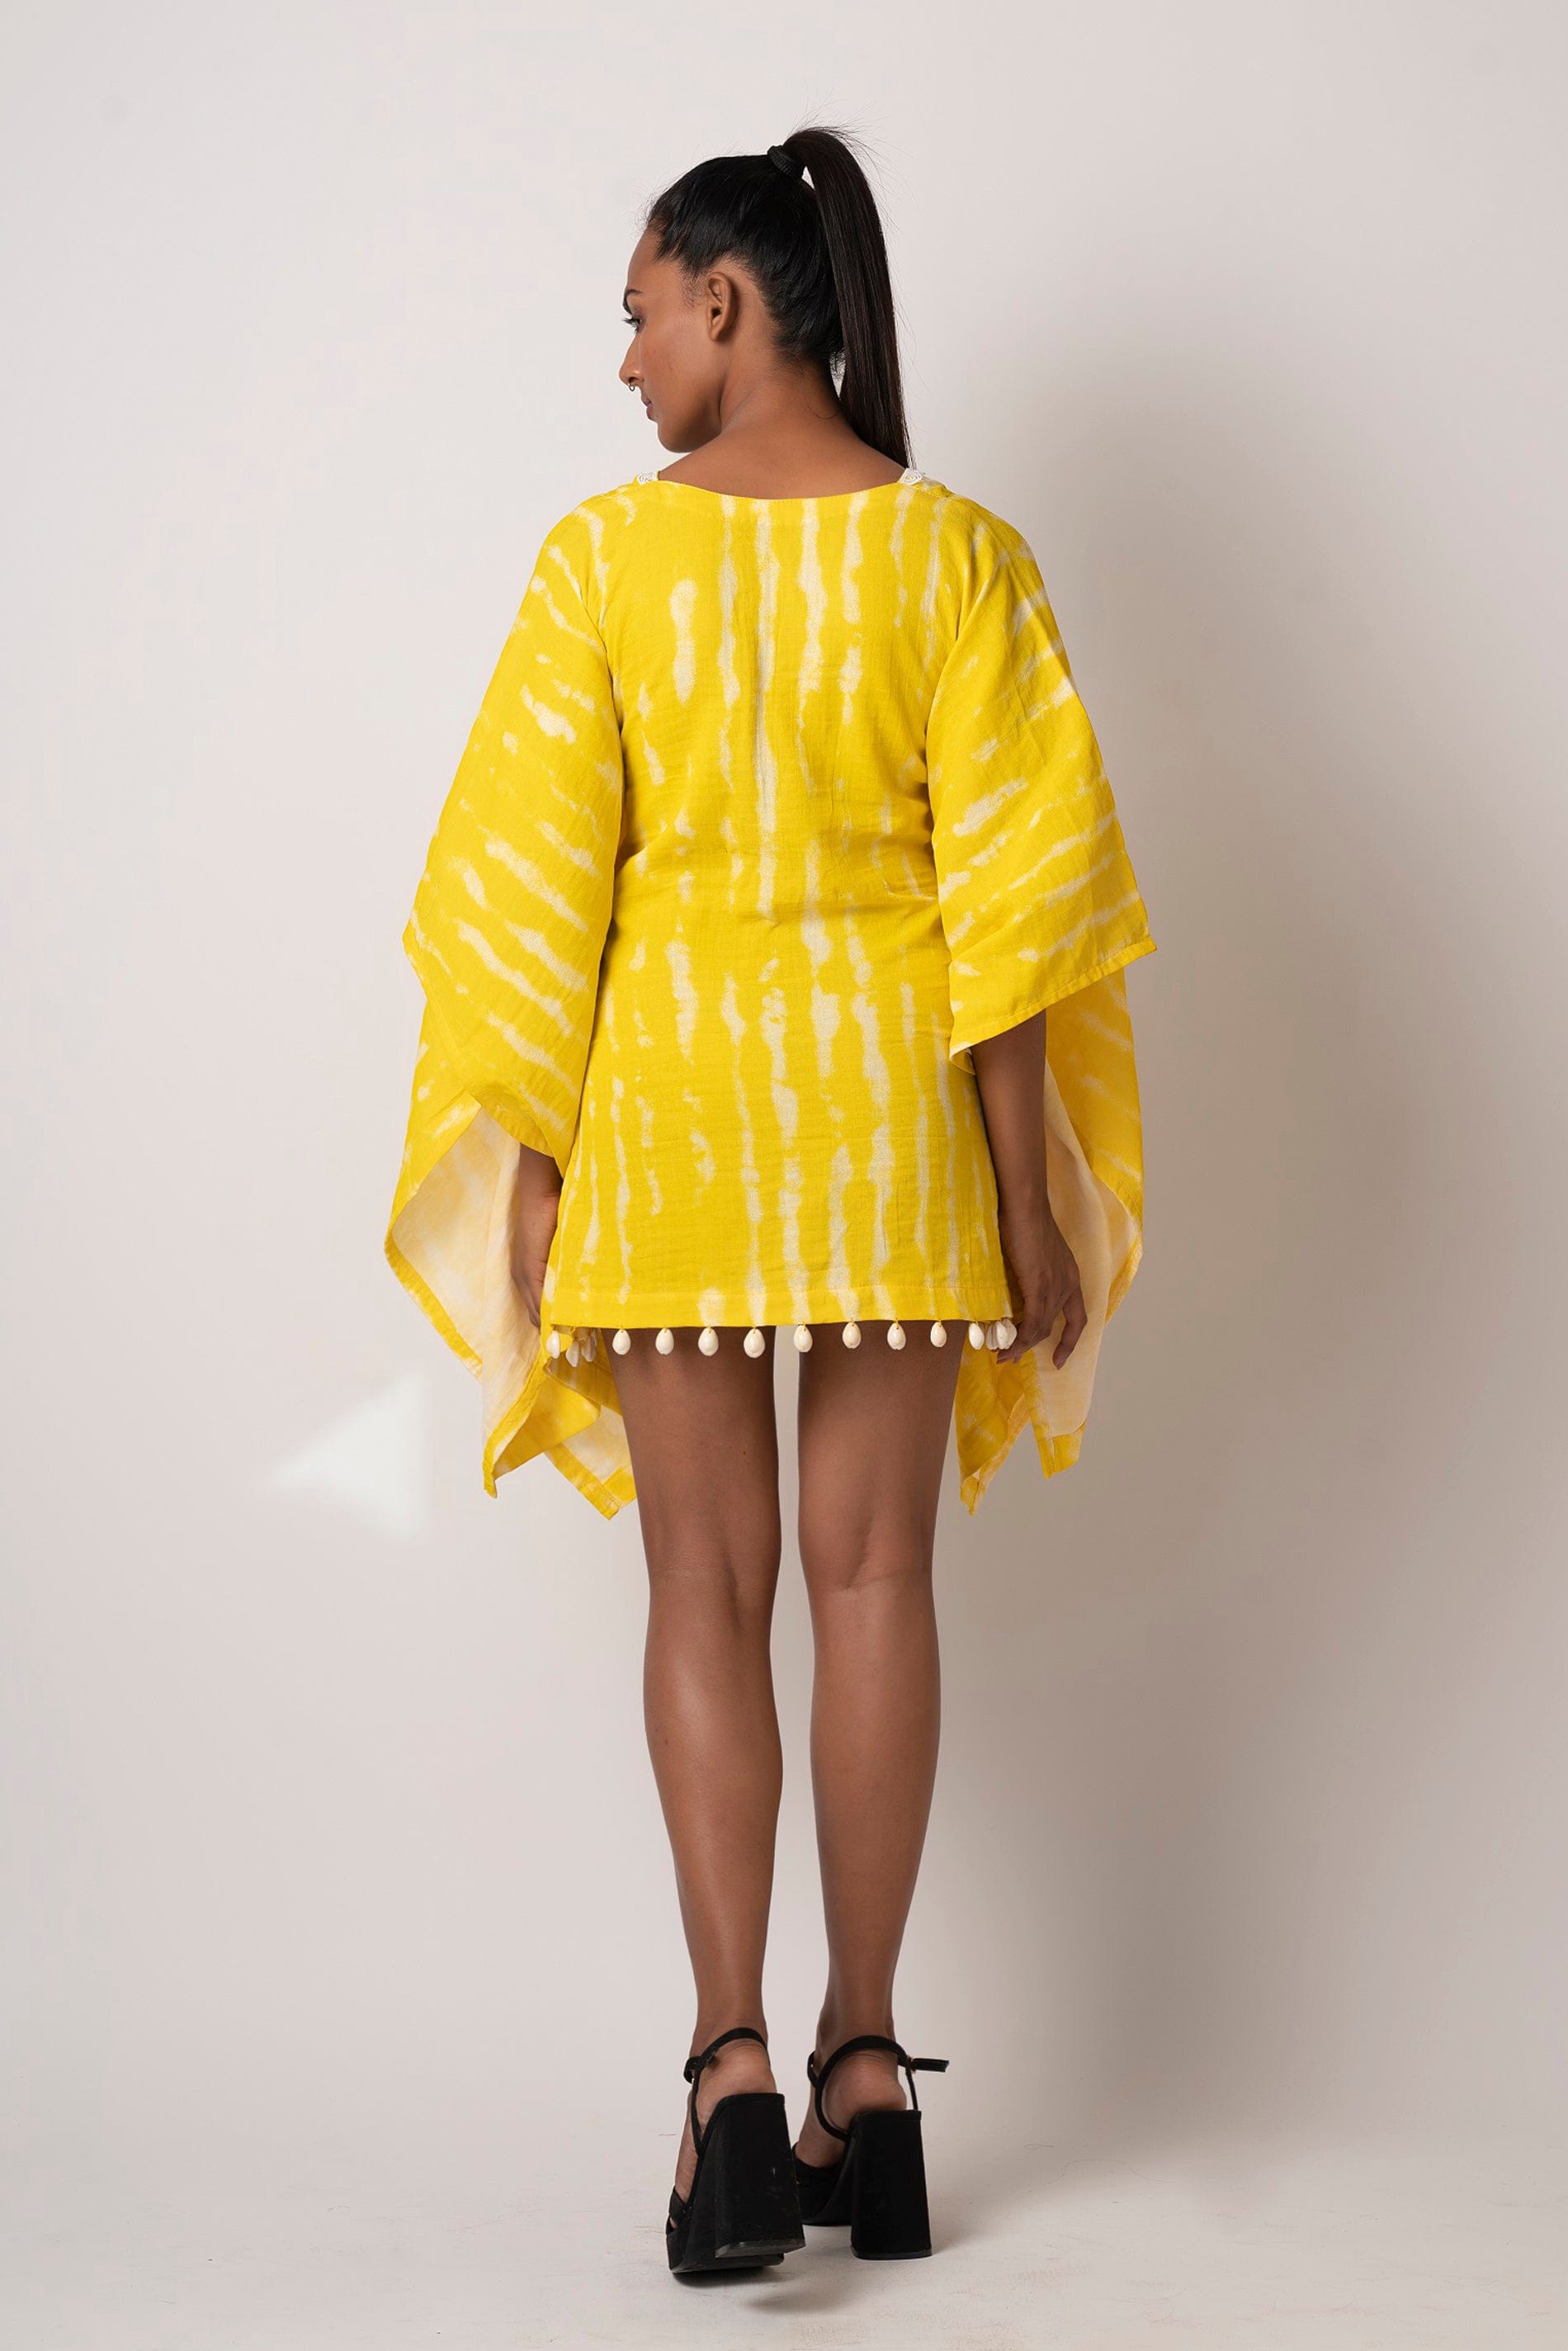 Add a pop of color to your outfit with this vibrant yellow tie-dye short beach dress.  It comes with kimono-style sleeves, yoke collar, and lace detailing and is perfect as a beach vacation dress or for a casual day out.